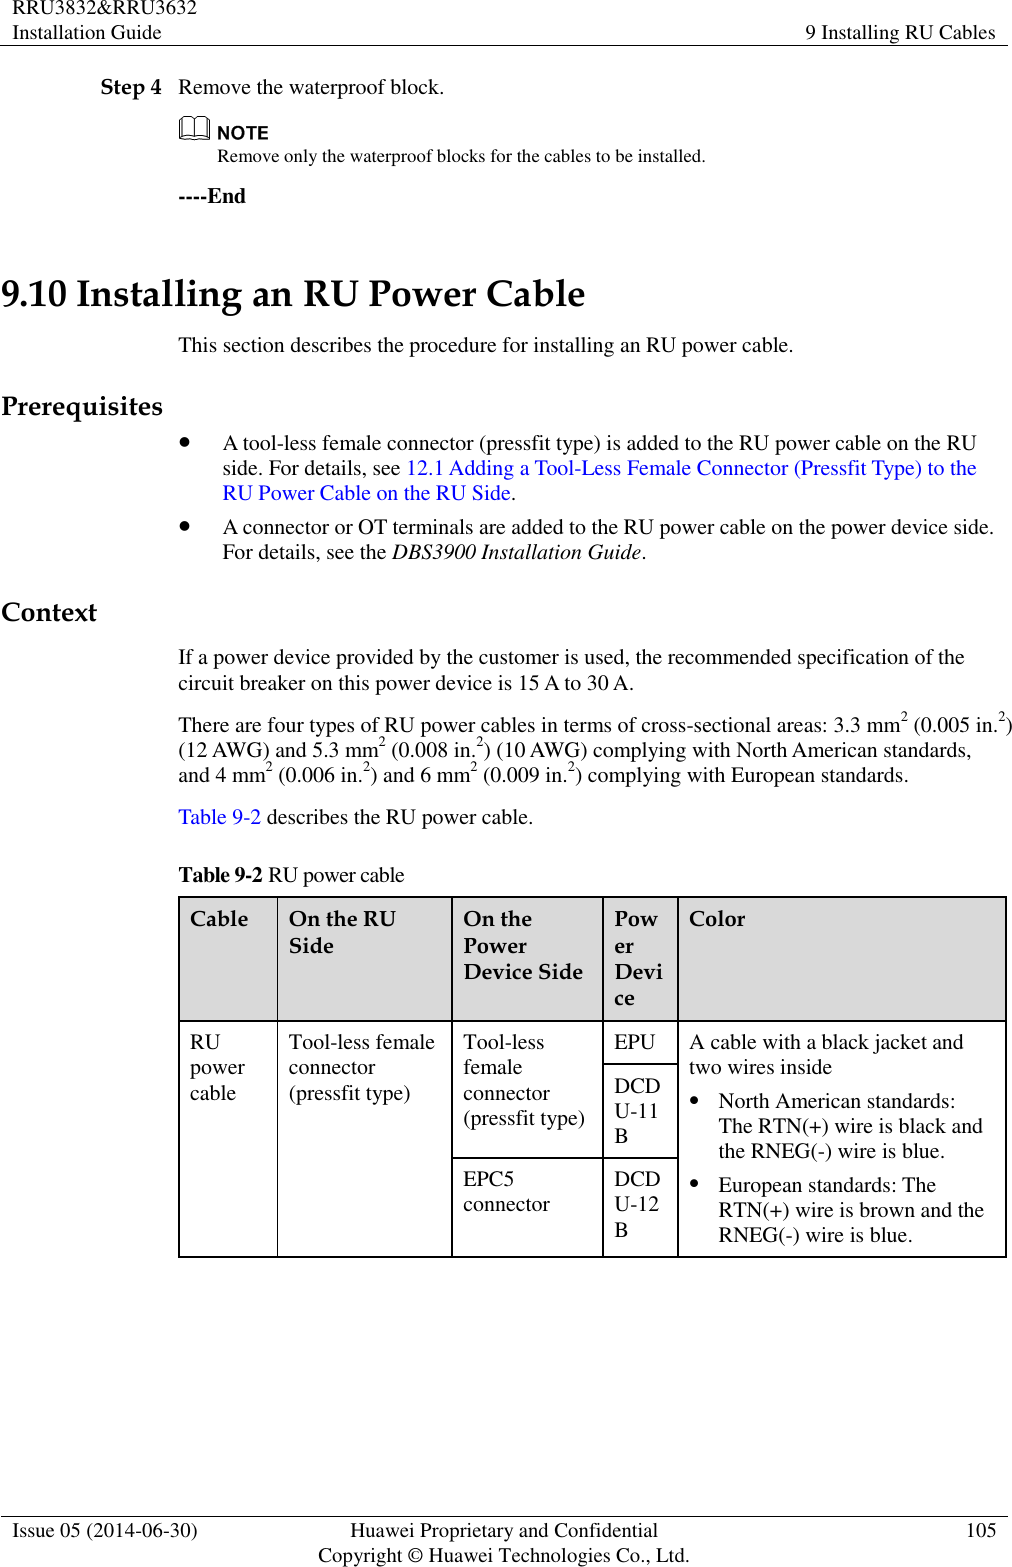 RRU3832&amp;RRU3632 Installation Guide 9 Installing RU Cables  Issue 05 (2014-06-30) Huawei Proprietary and Confidential                                     Copyright © Huawei Technologies Co., Ltd. 105  Step 4 Remove the waterproof block.  Remove only the waterproof blocks for the cables to be installed. ----End 9.10 Installing an RU Power Cable This section describes the procedure for installing an RU power cable. Prerequisites  A tool-less female connector (pressfit type) is added to the RU power cable on the RU side. For details, see 12.1 Adding a Tool-Less Female Connector (Pressfit Type) to the RU Power Cable on the RU Side.  A connector or OT terminals are added to the RU power cable on the power device side. For details, see the DBS3900 Installation Guide. Context If a power device provided by the customer is used, the recommended specification of the circuit breaker on this power device is 15 A to 30 A. There are four types of RU power cables in terms of cross-sectional areas: 3.3 mm2 (0.005 in.2) (12 AWG) and 5.3 mm2 (0.008 in.2) (10 AWG) complying with North American standards, and 4 mm2 (0.006 in.2) and 6 mm2 (0.009 in.2) complying with European standards. Table 9-2 describes the RU power cable. Table 9-2 RU power cable Cable On the RU Side On the Power Device Side Power Device Color RU power cable Tool-less female connector (pressfit type) Tool-less female connector (pressfit type) EPU A cable with a black jacket and two wires inside  North American standards: The RTN(+) wire is black and the RNEG(-) wire is blue.  European standards: The RTN(+) wire is brown and the RNEG(-) wire is blue. DCDU-11B EPC5 connector DCDU-12B  